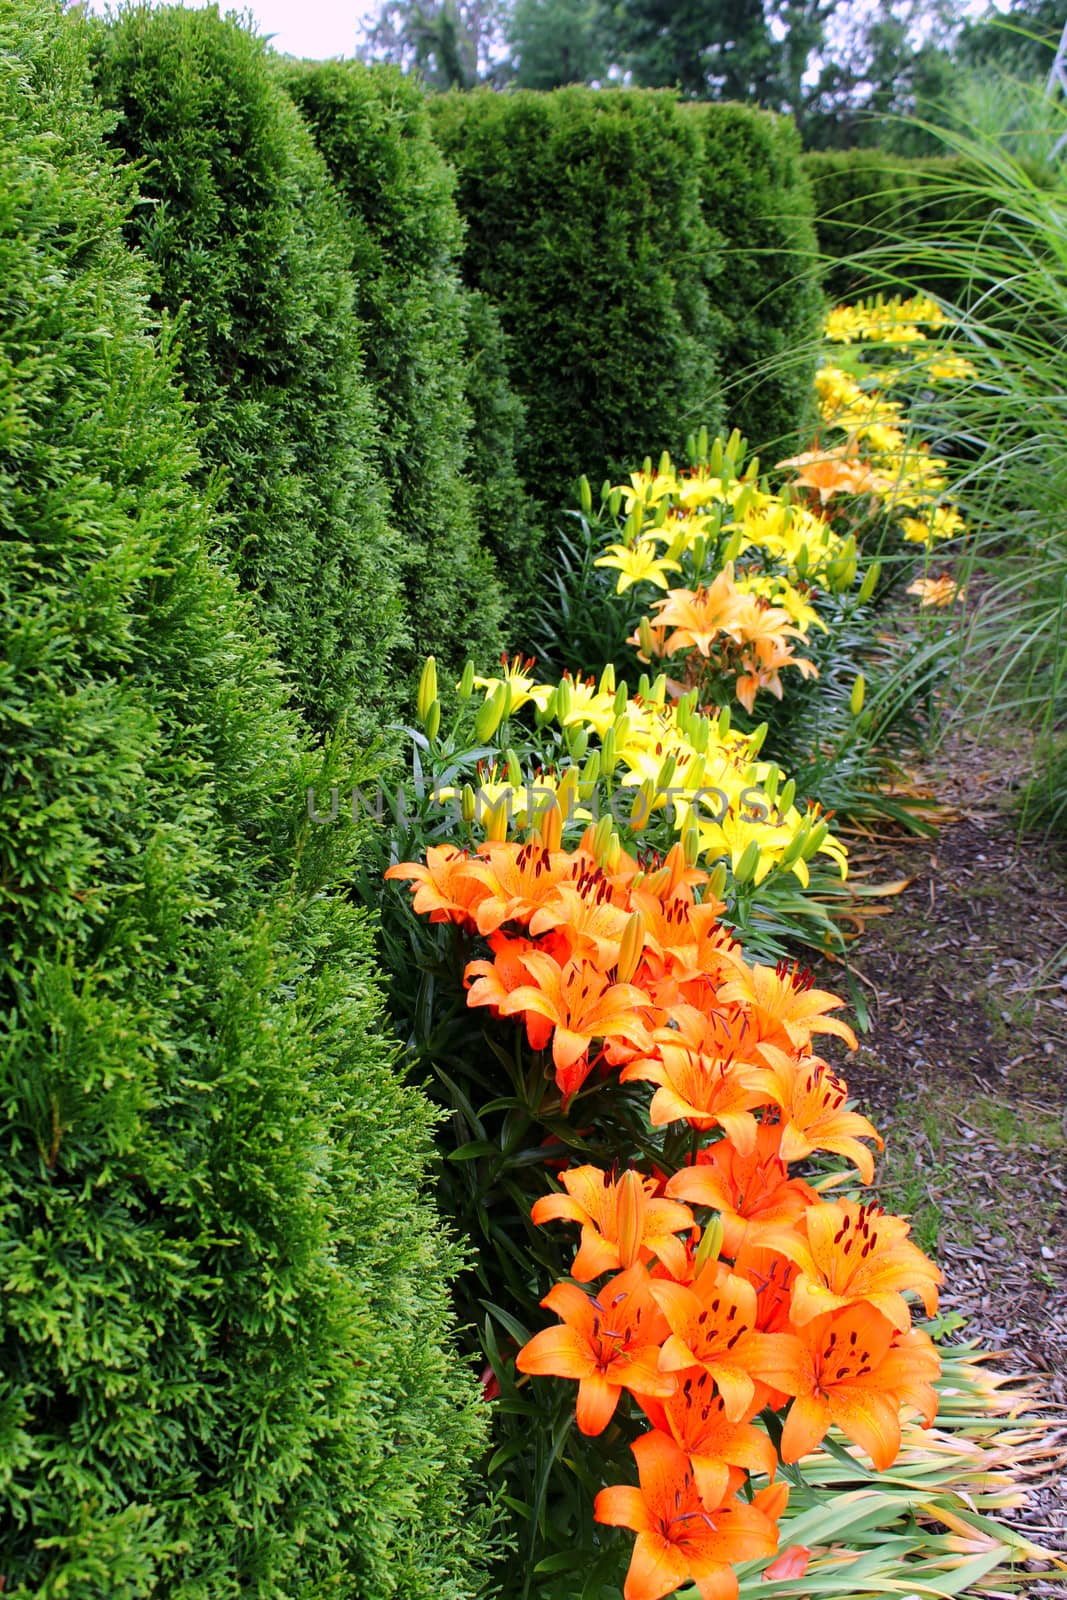 A row of evergreen shrubs with yellow, orange Lily flowers at their feet.